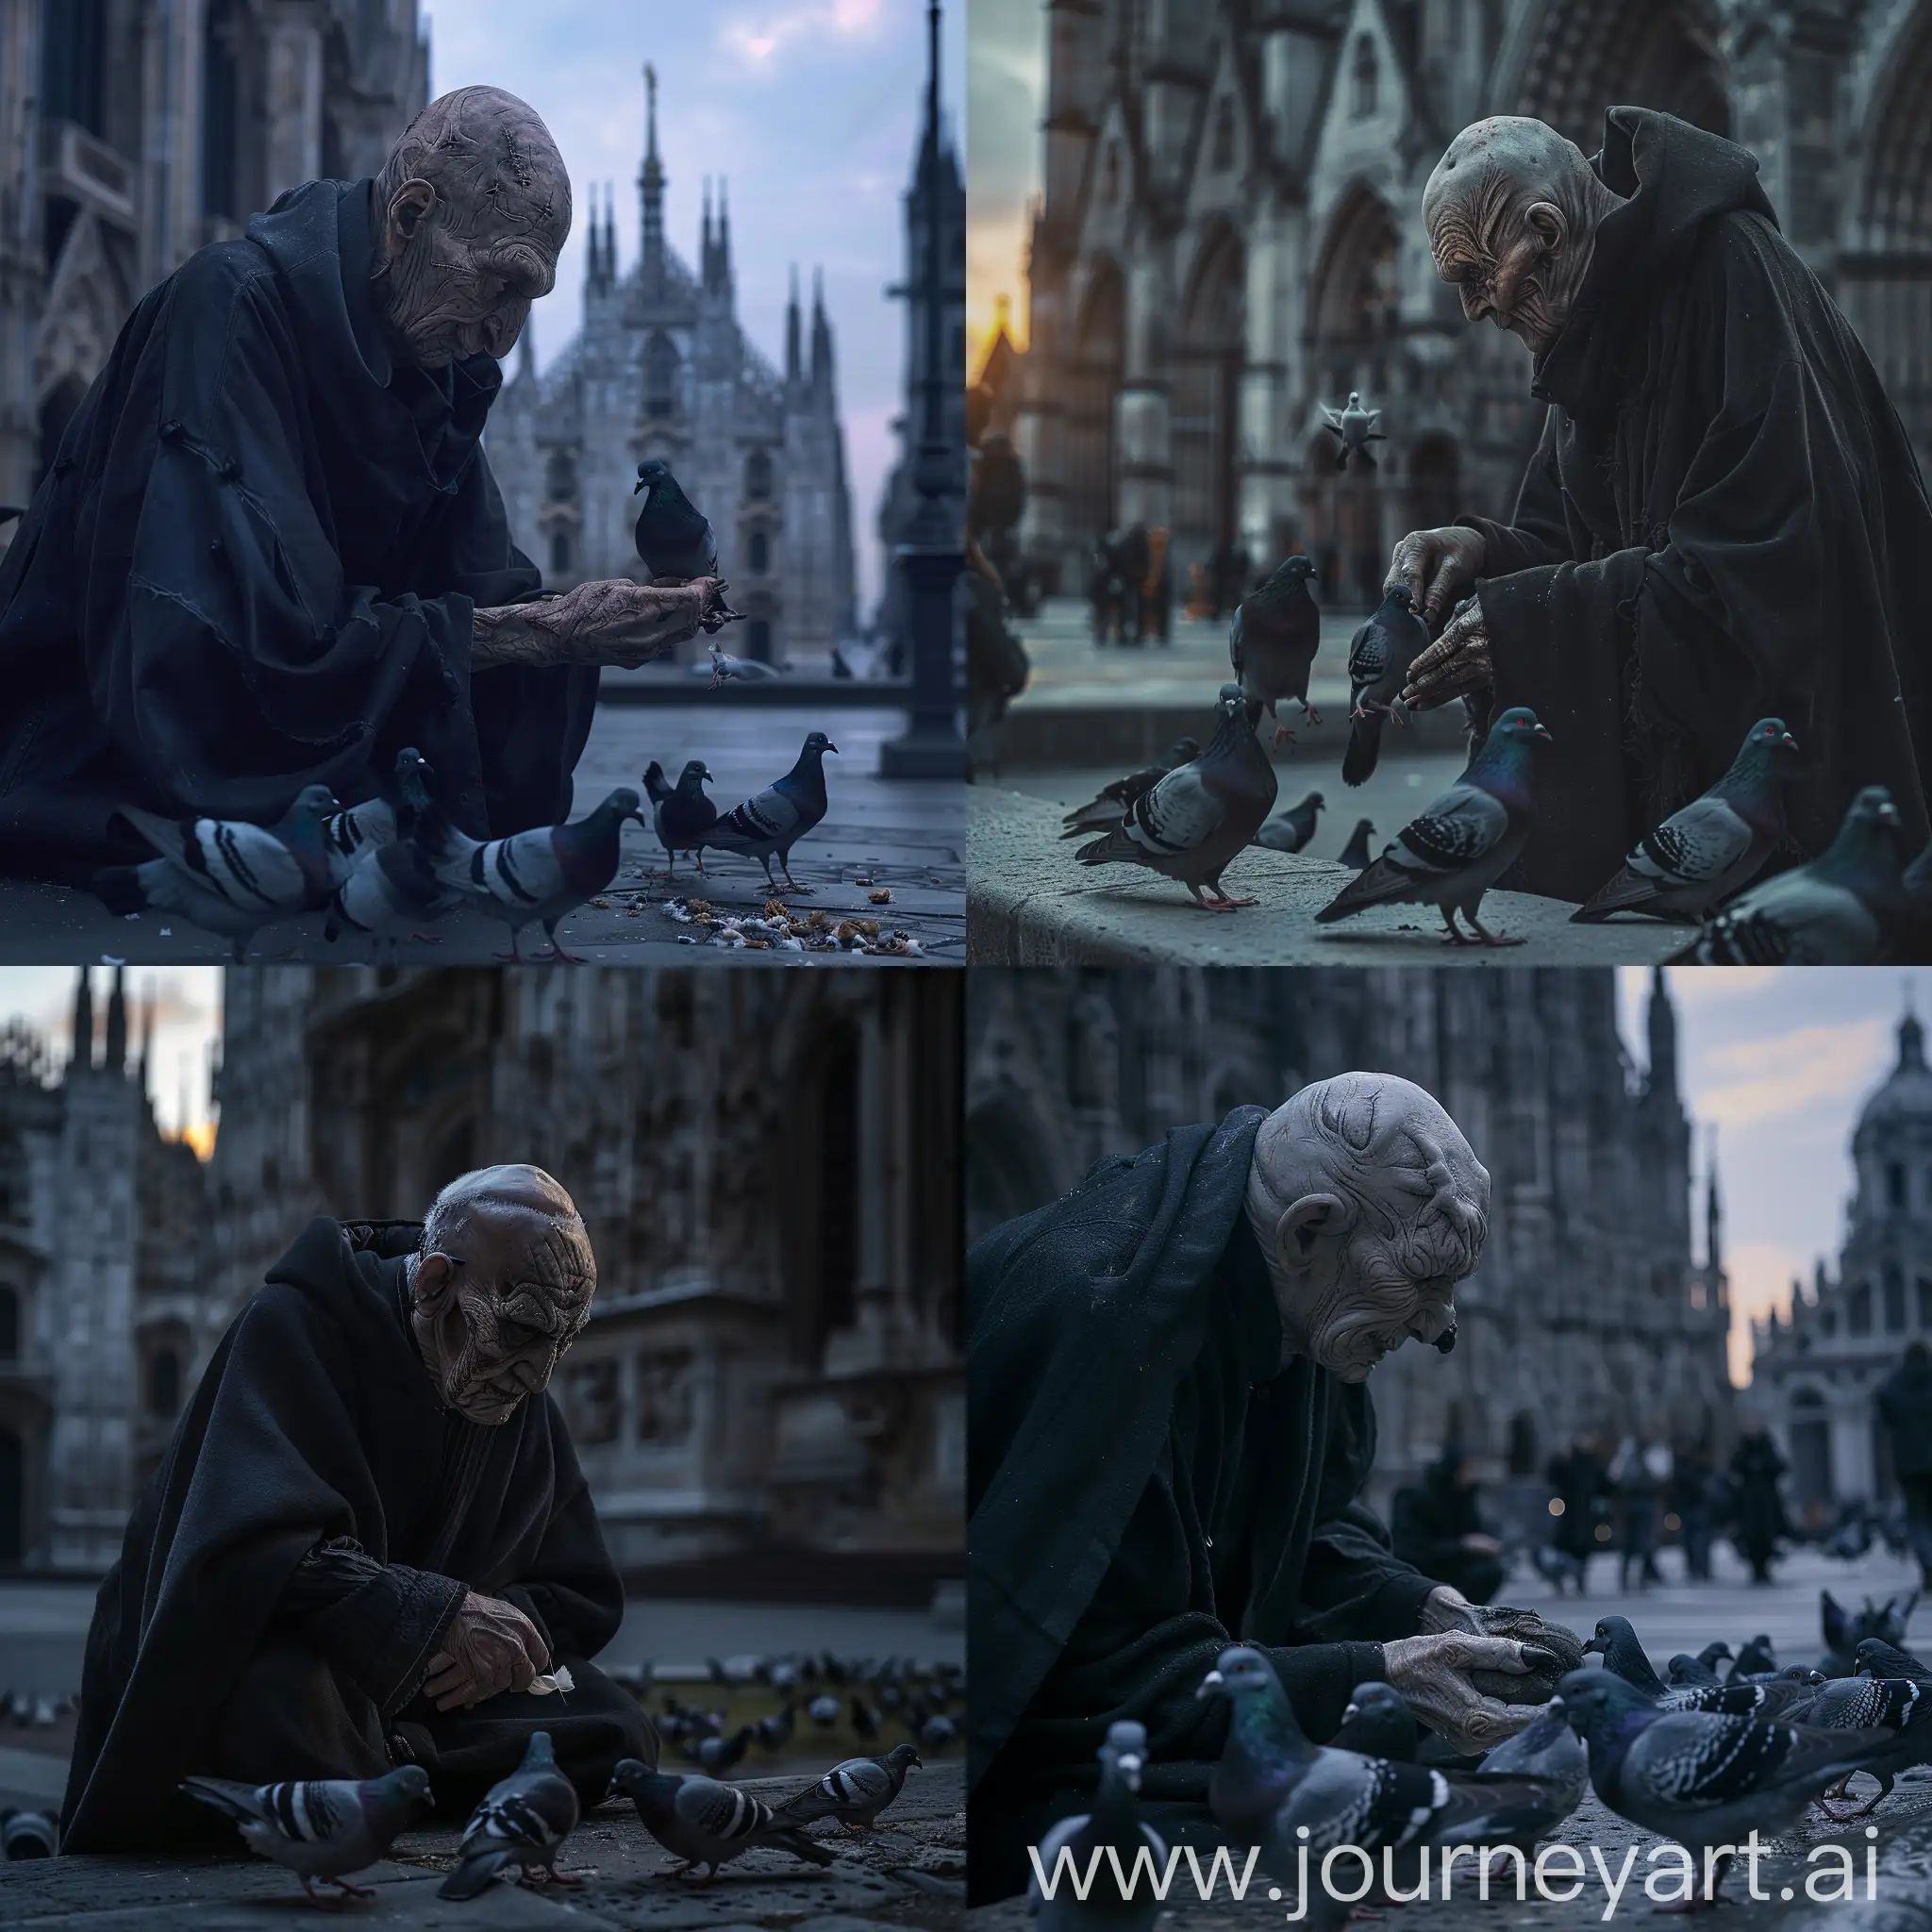 Elderly person with extensive facial prosthetics and makeup to create a monstrous appearance, balding head , wearing a dark robe , feeding the pigeons in front of a gothic cathedral, dawn, midnight, dark colors, gothic environment, dramatic lighting